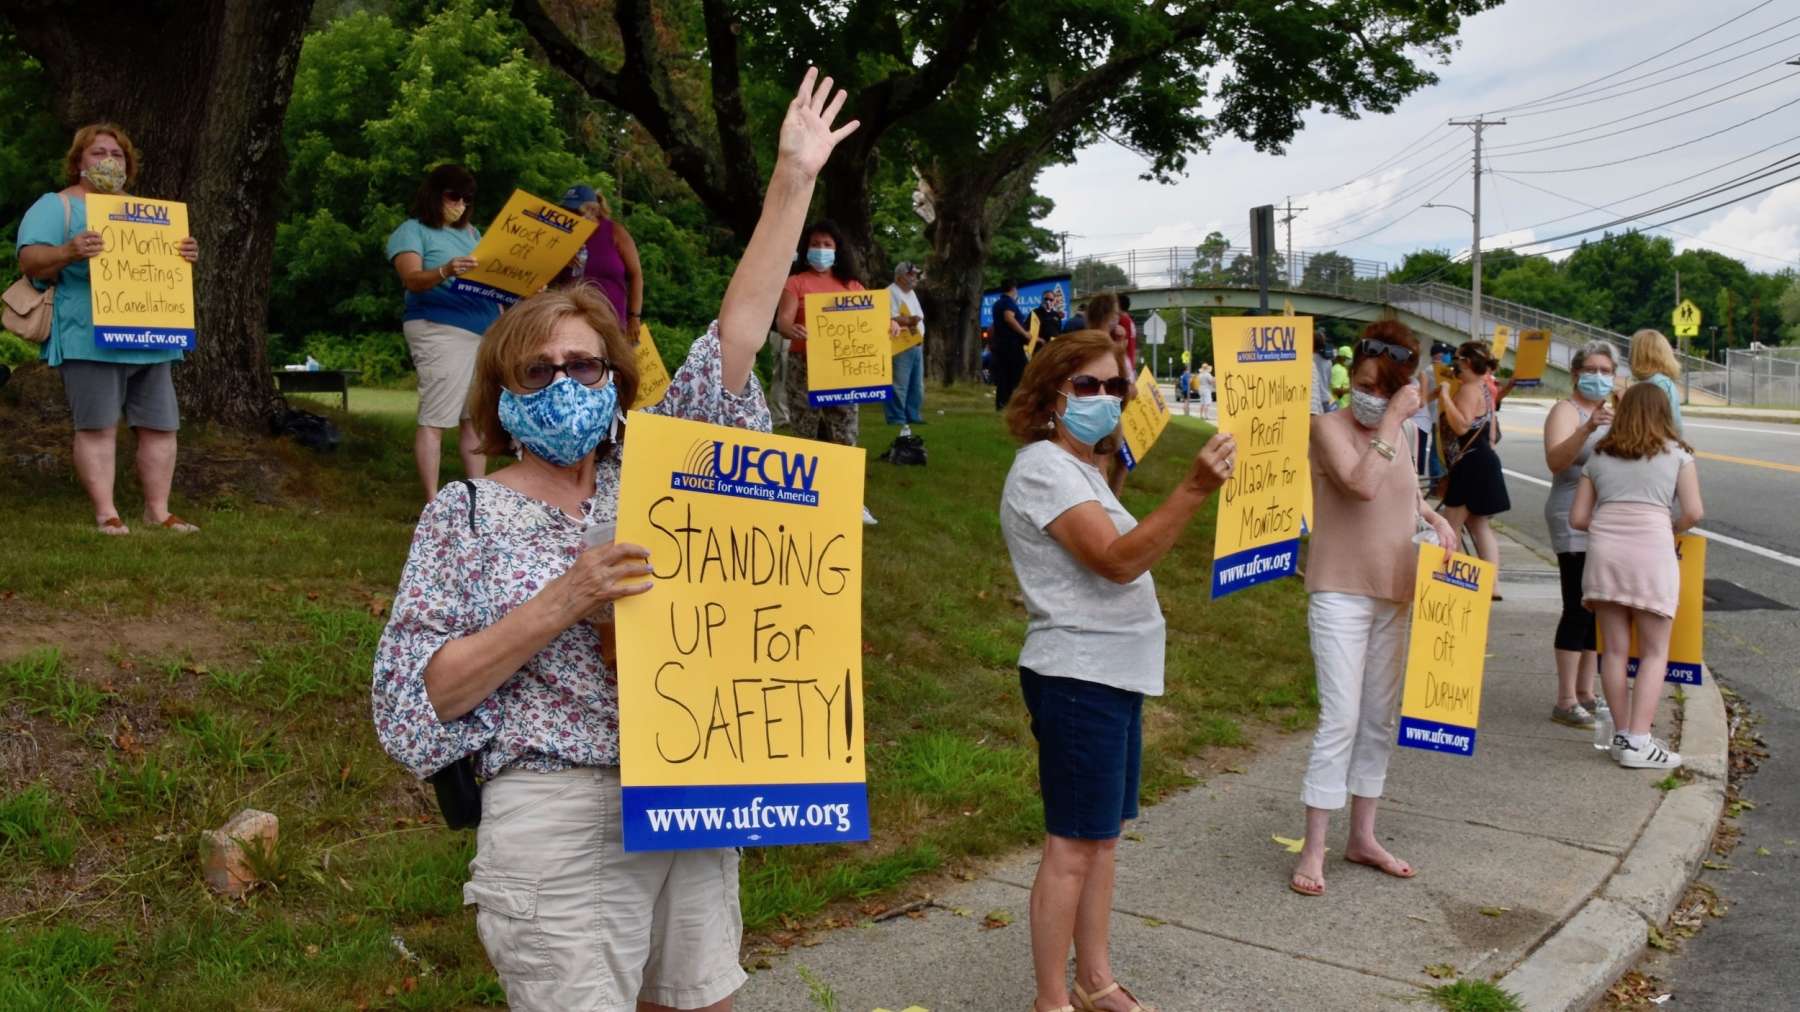 Rhode Island News: School bus drivers and monitors authorize work action against Durham